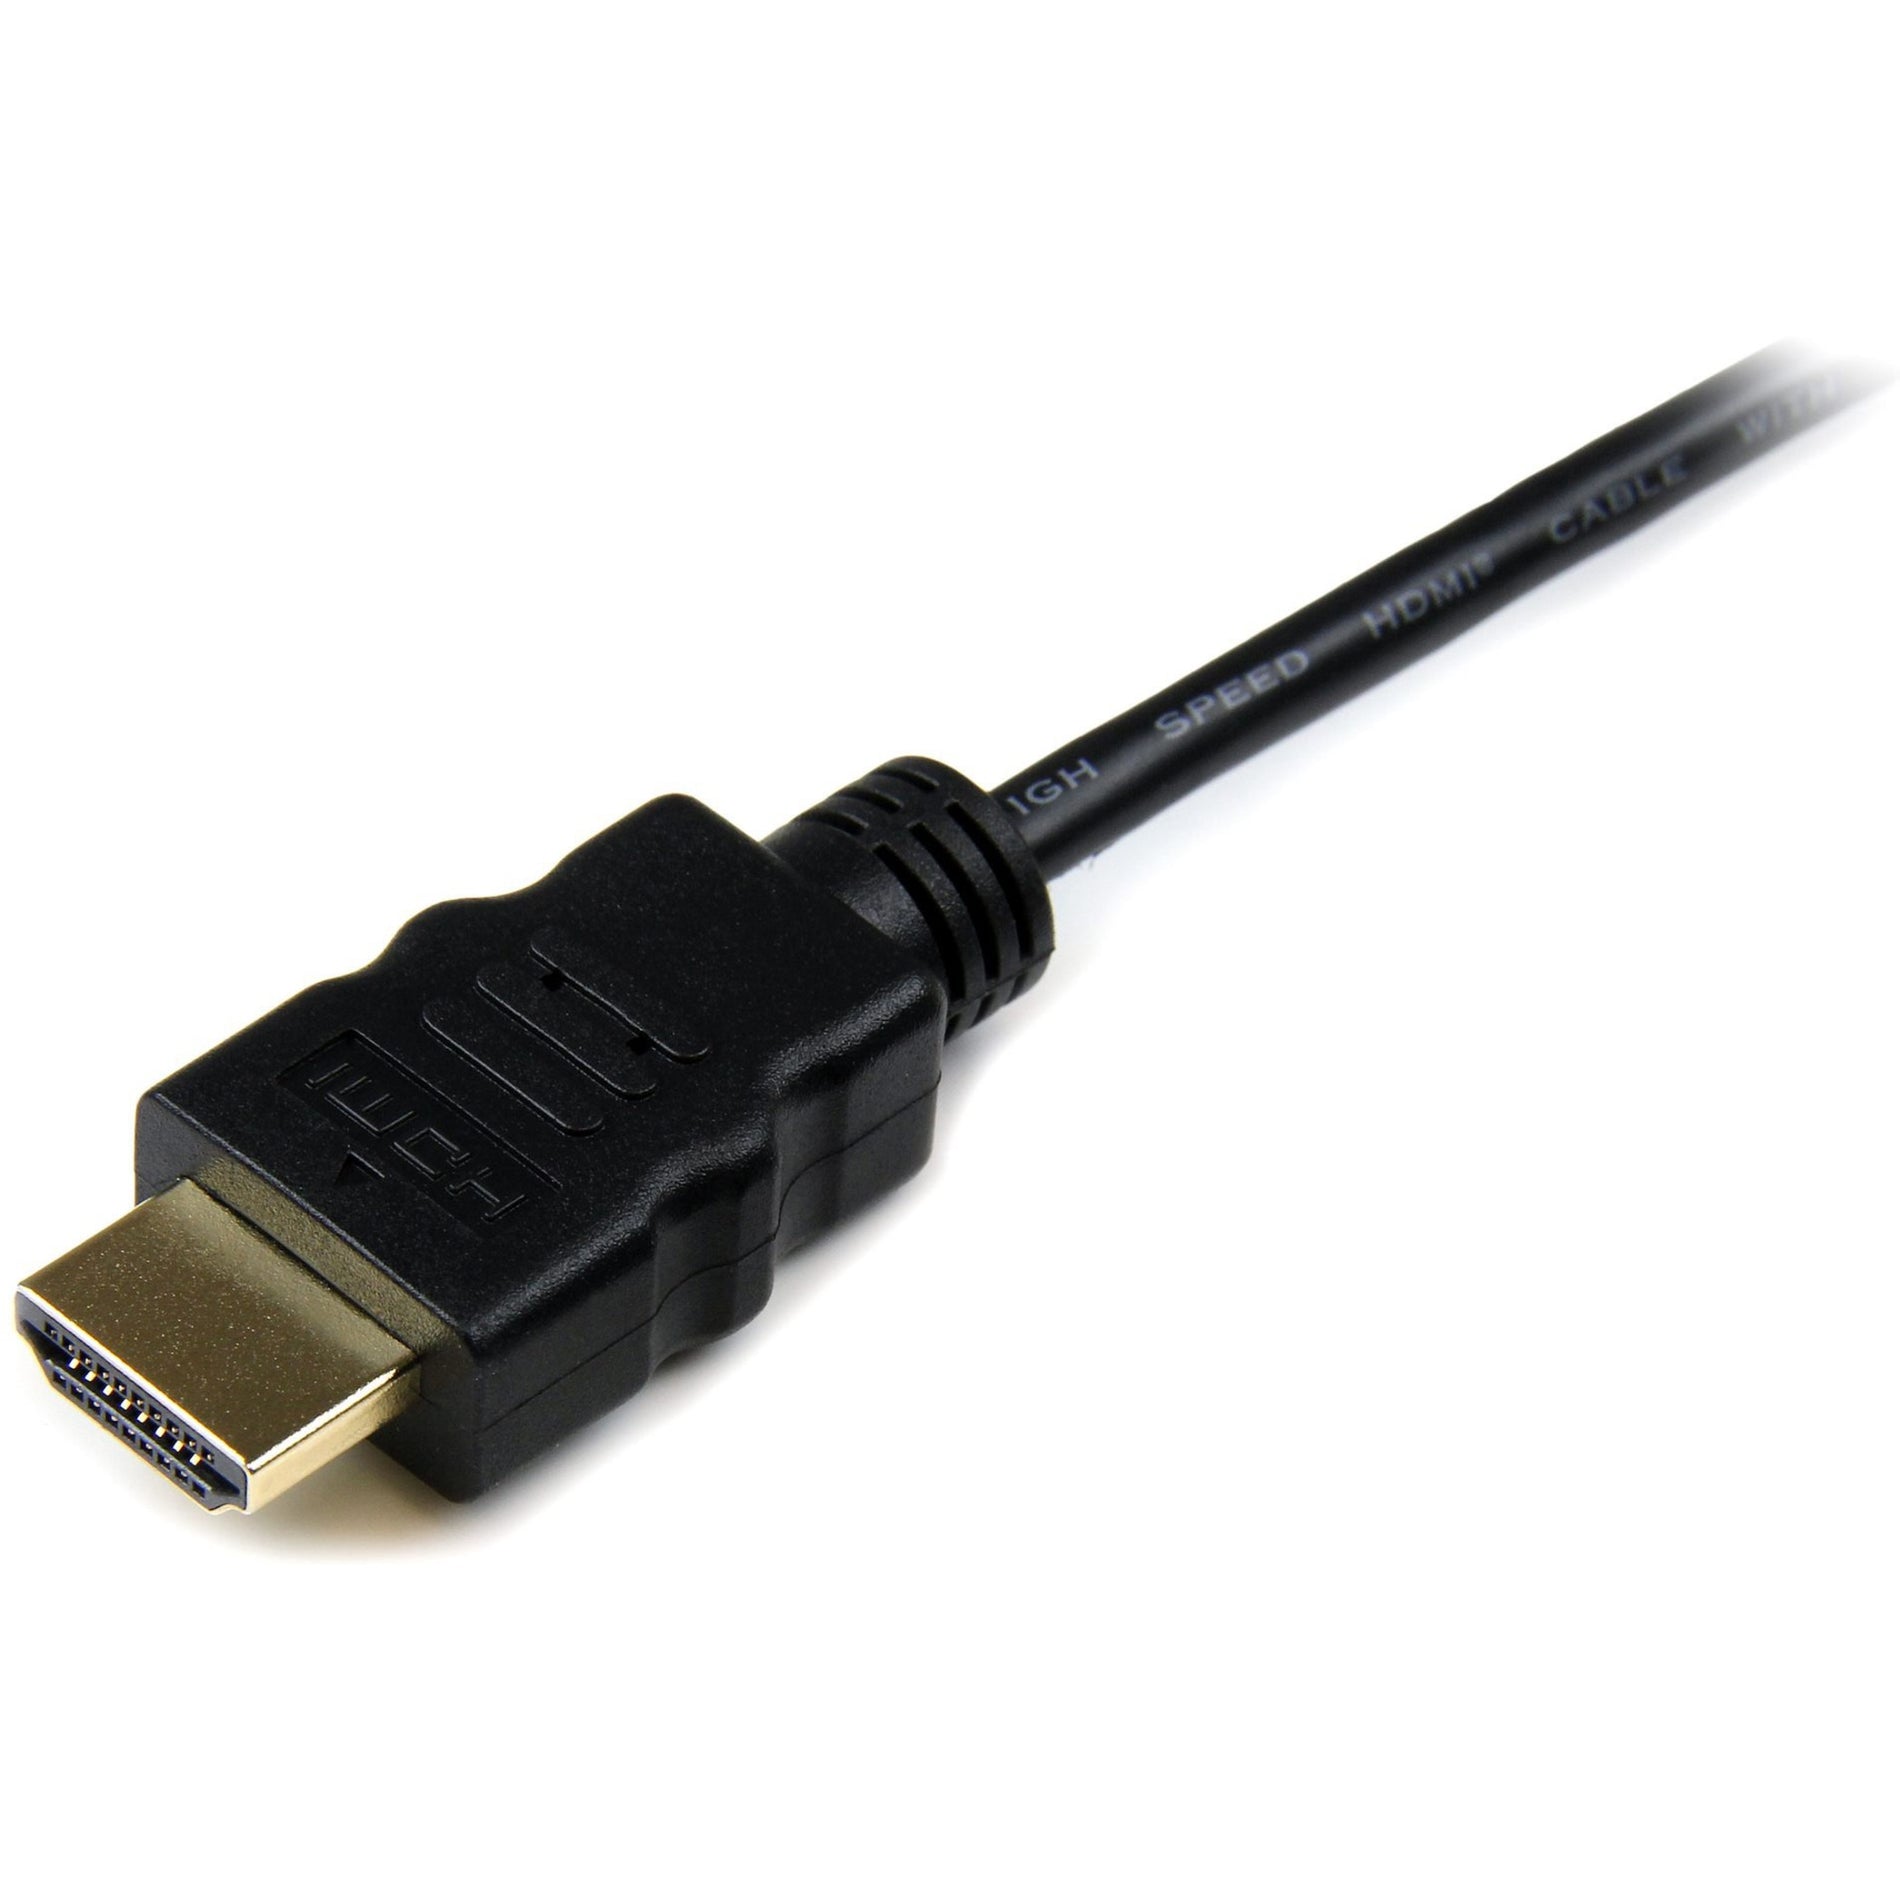 StarTech.com HDMIADMM6 6 ft High Speed HDMI Cable with Ethernet, HDMI to HDMI Micro - M/M